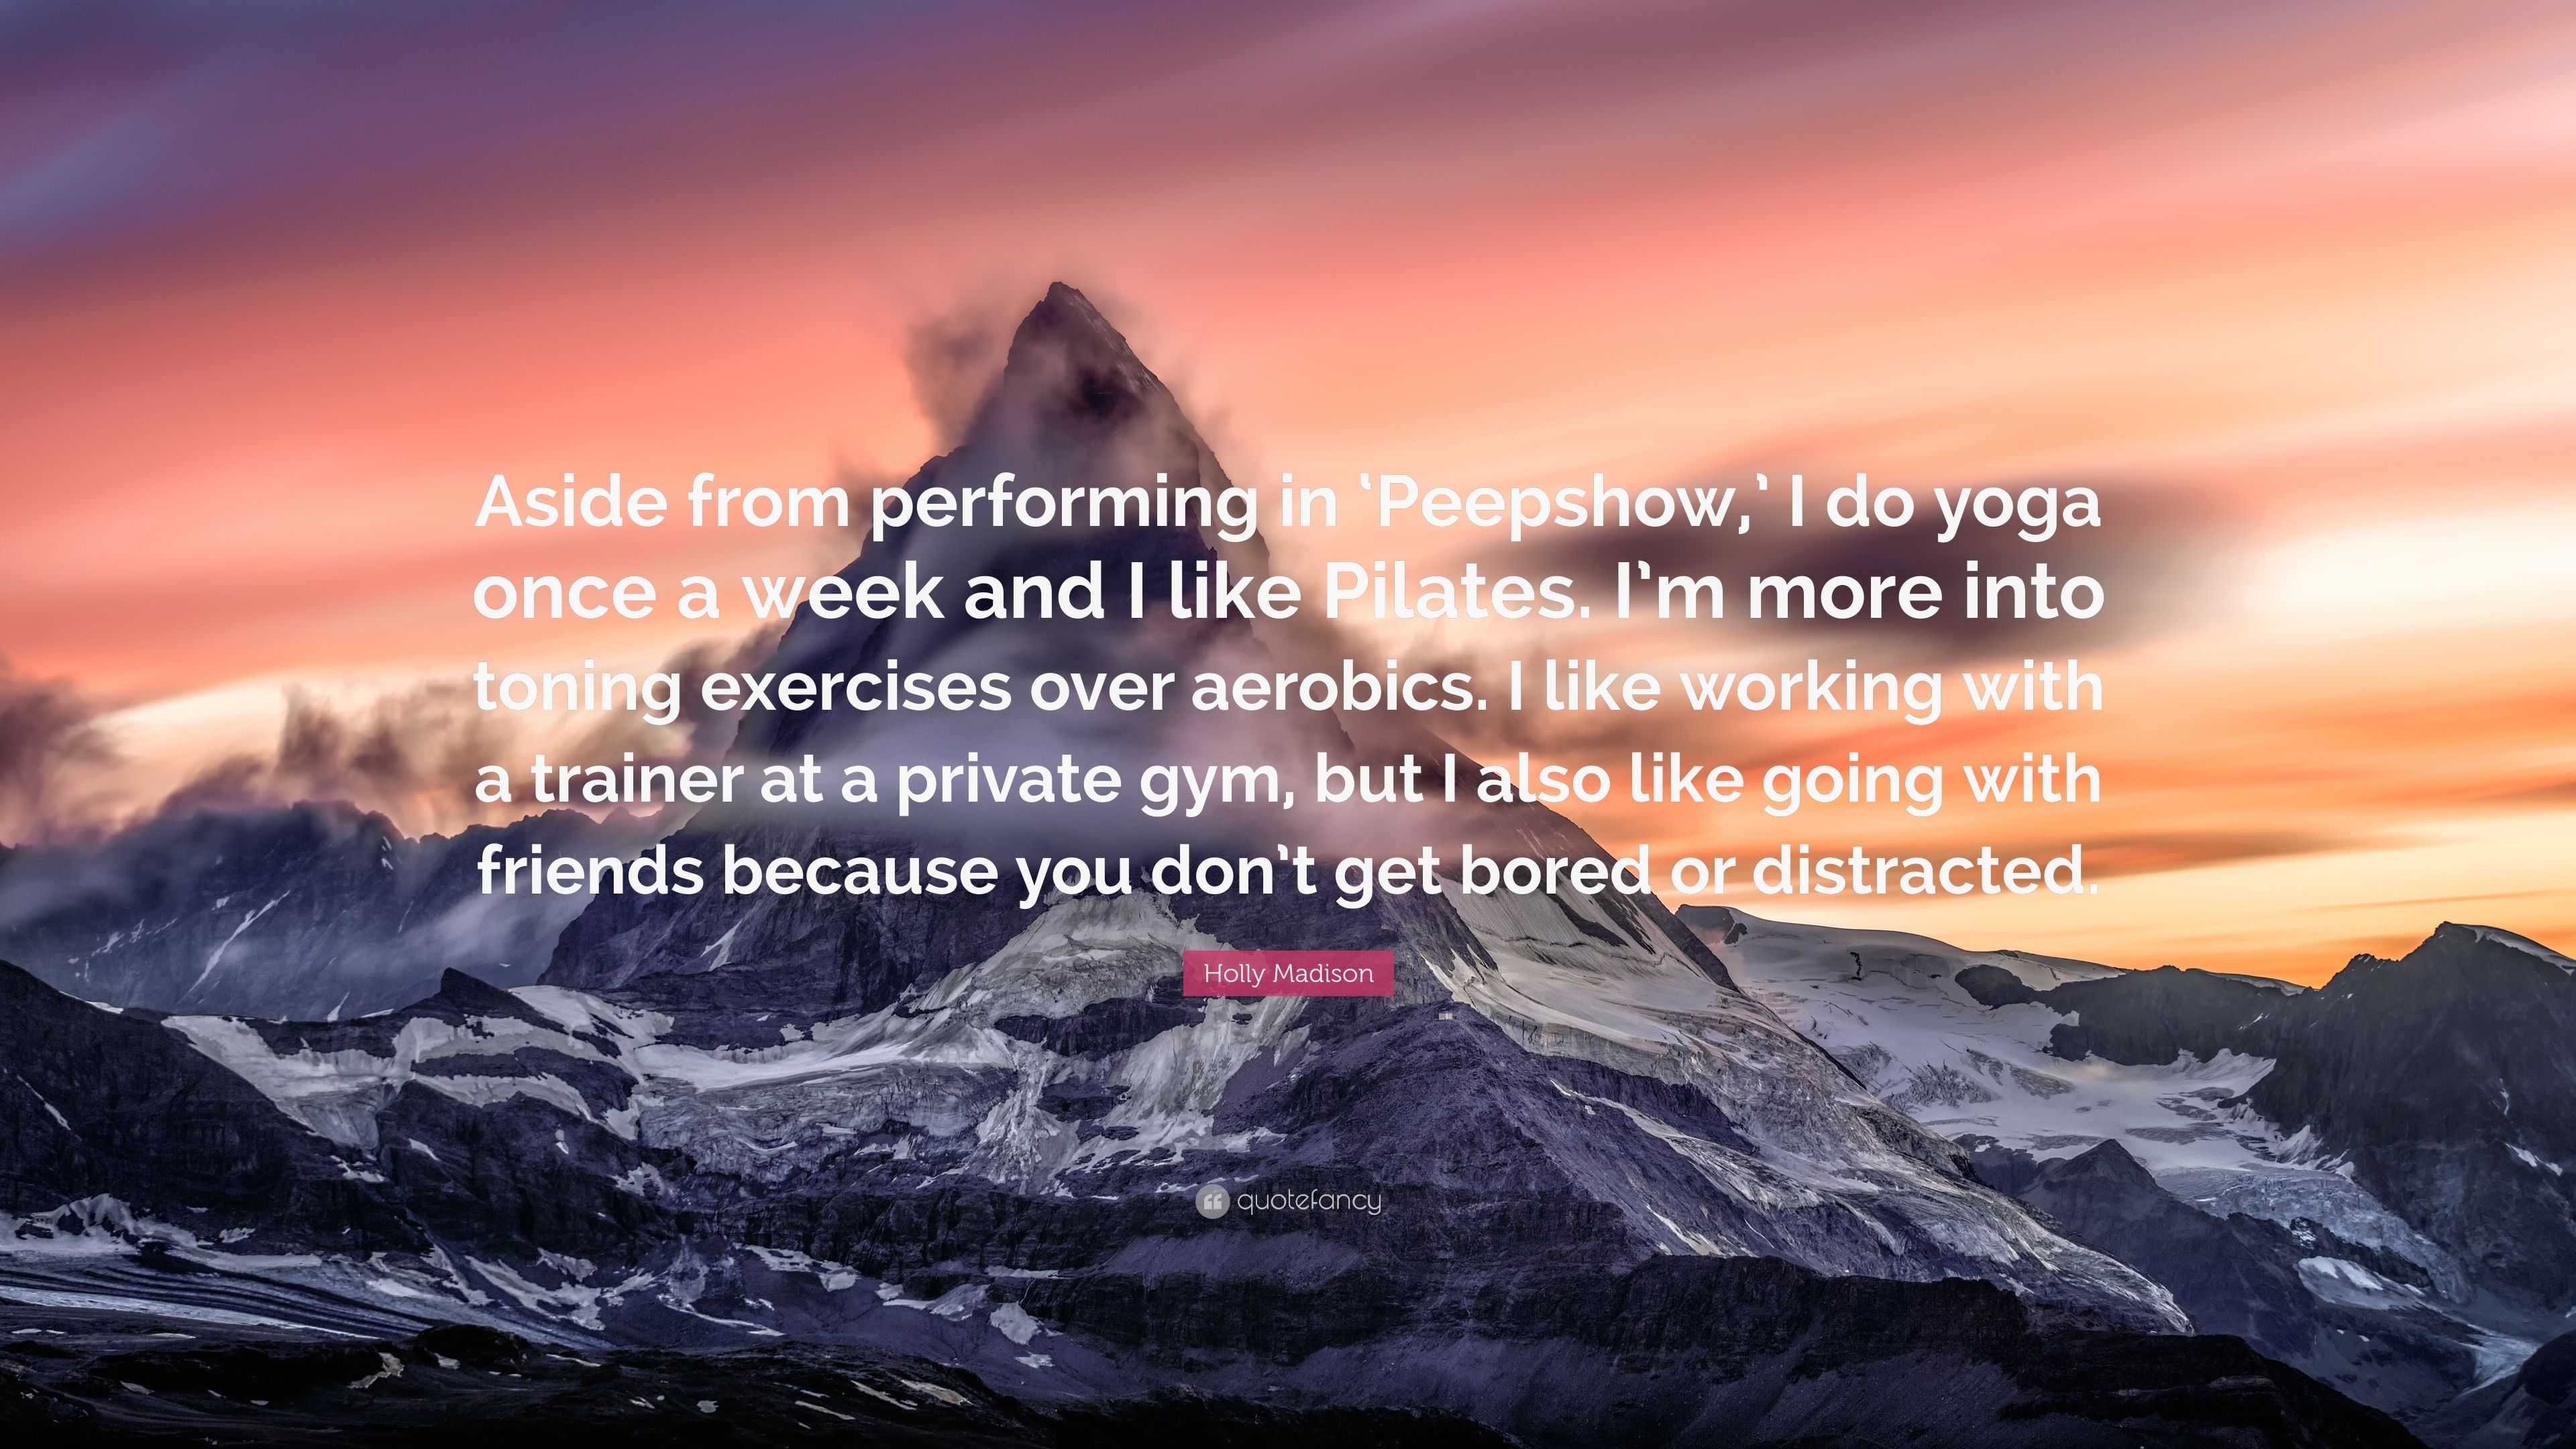 https://quotefancy.com/media/wallpaper/3840x2160/3402256-Holly-Madison-Quote-Aside-from-performing-in-Peepshow-I-do-yoga.jpg